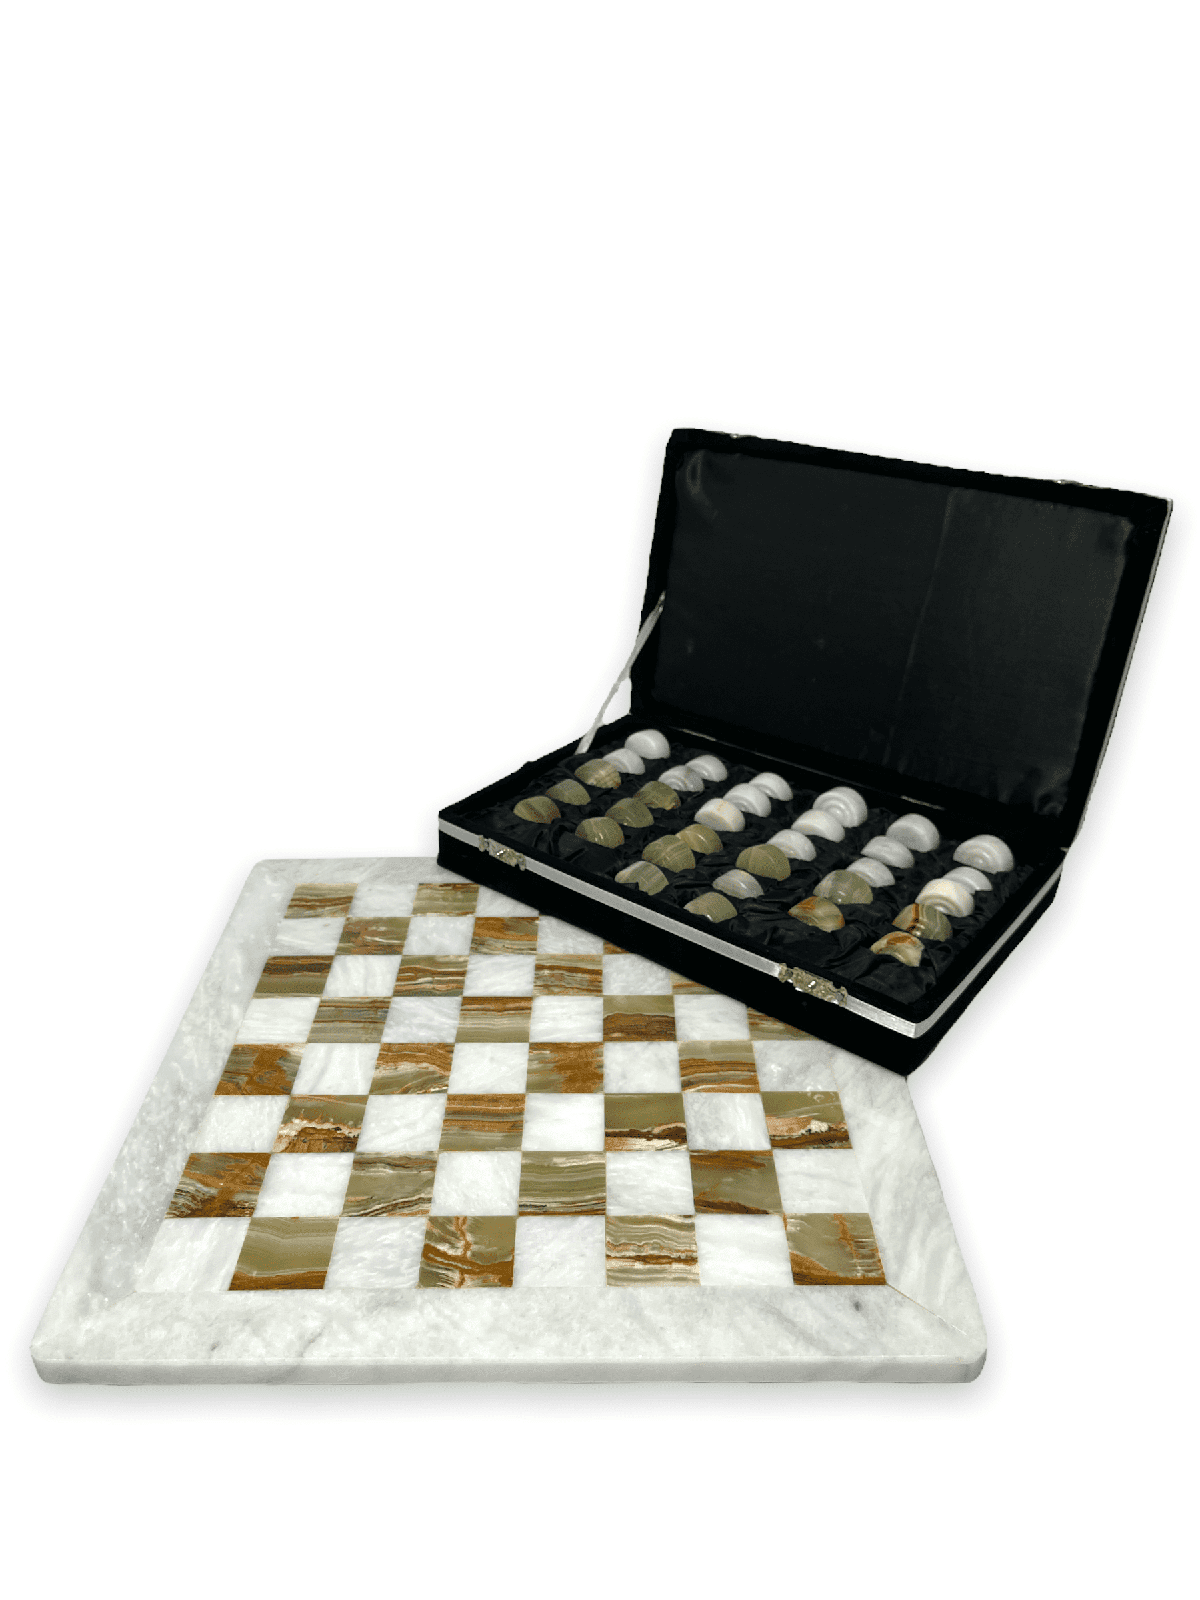 Marble Checkers Set with Storage Case - White and Onyx - Marble Cultures